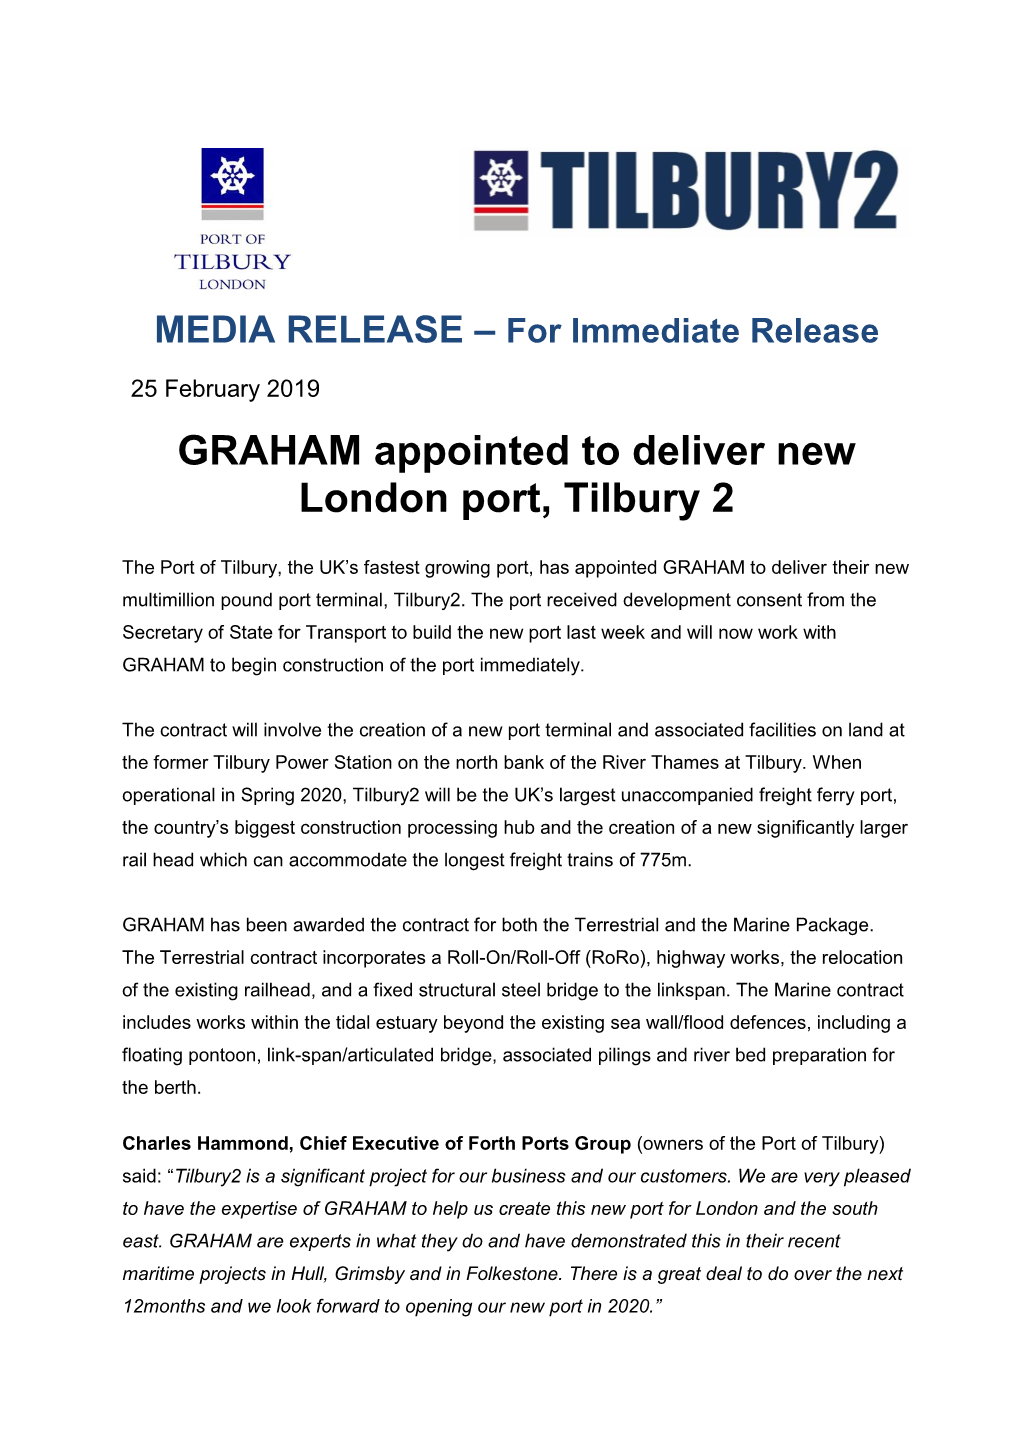 GRAHAM Appointed to Deliver New London Port, Tilbury 2